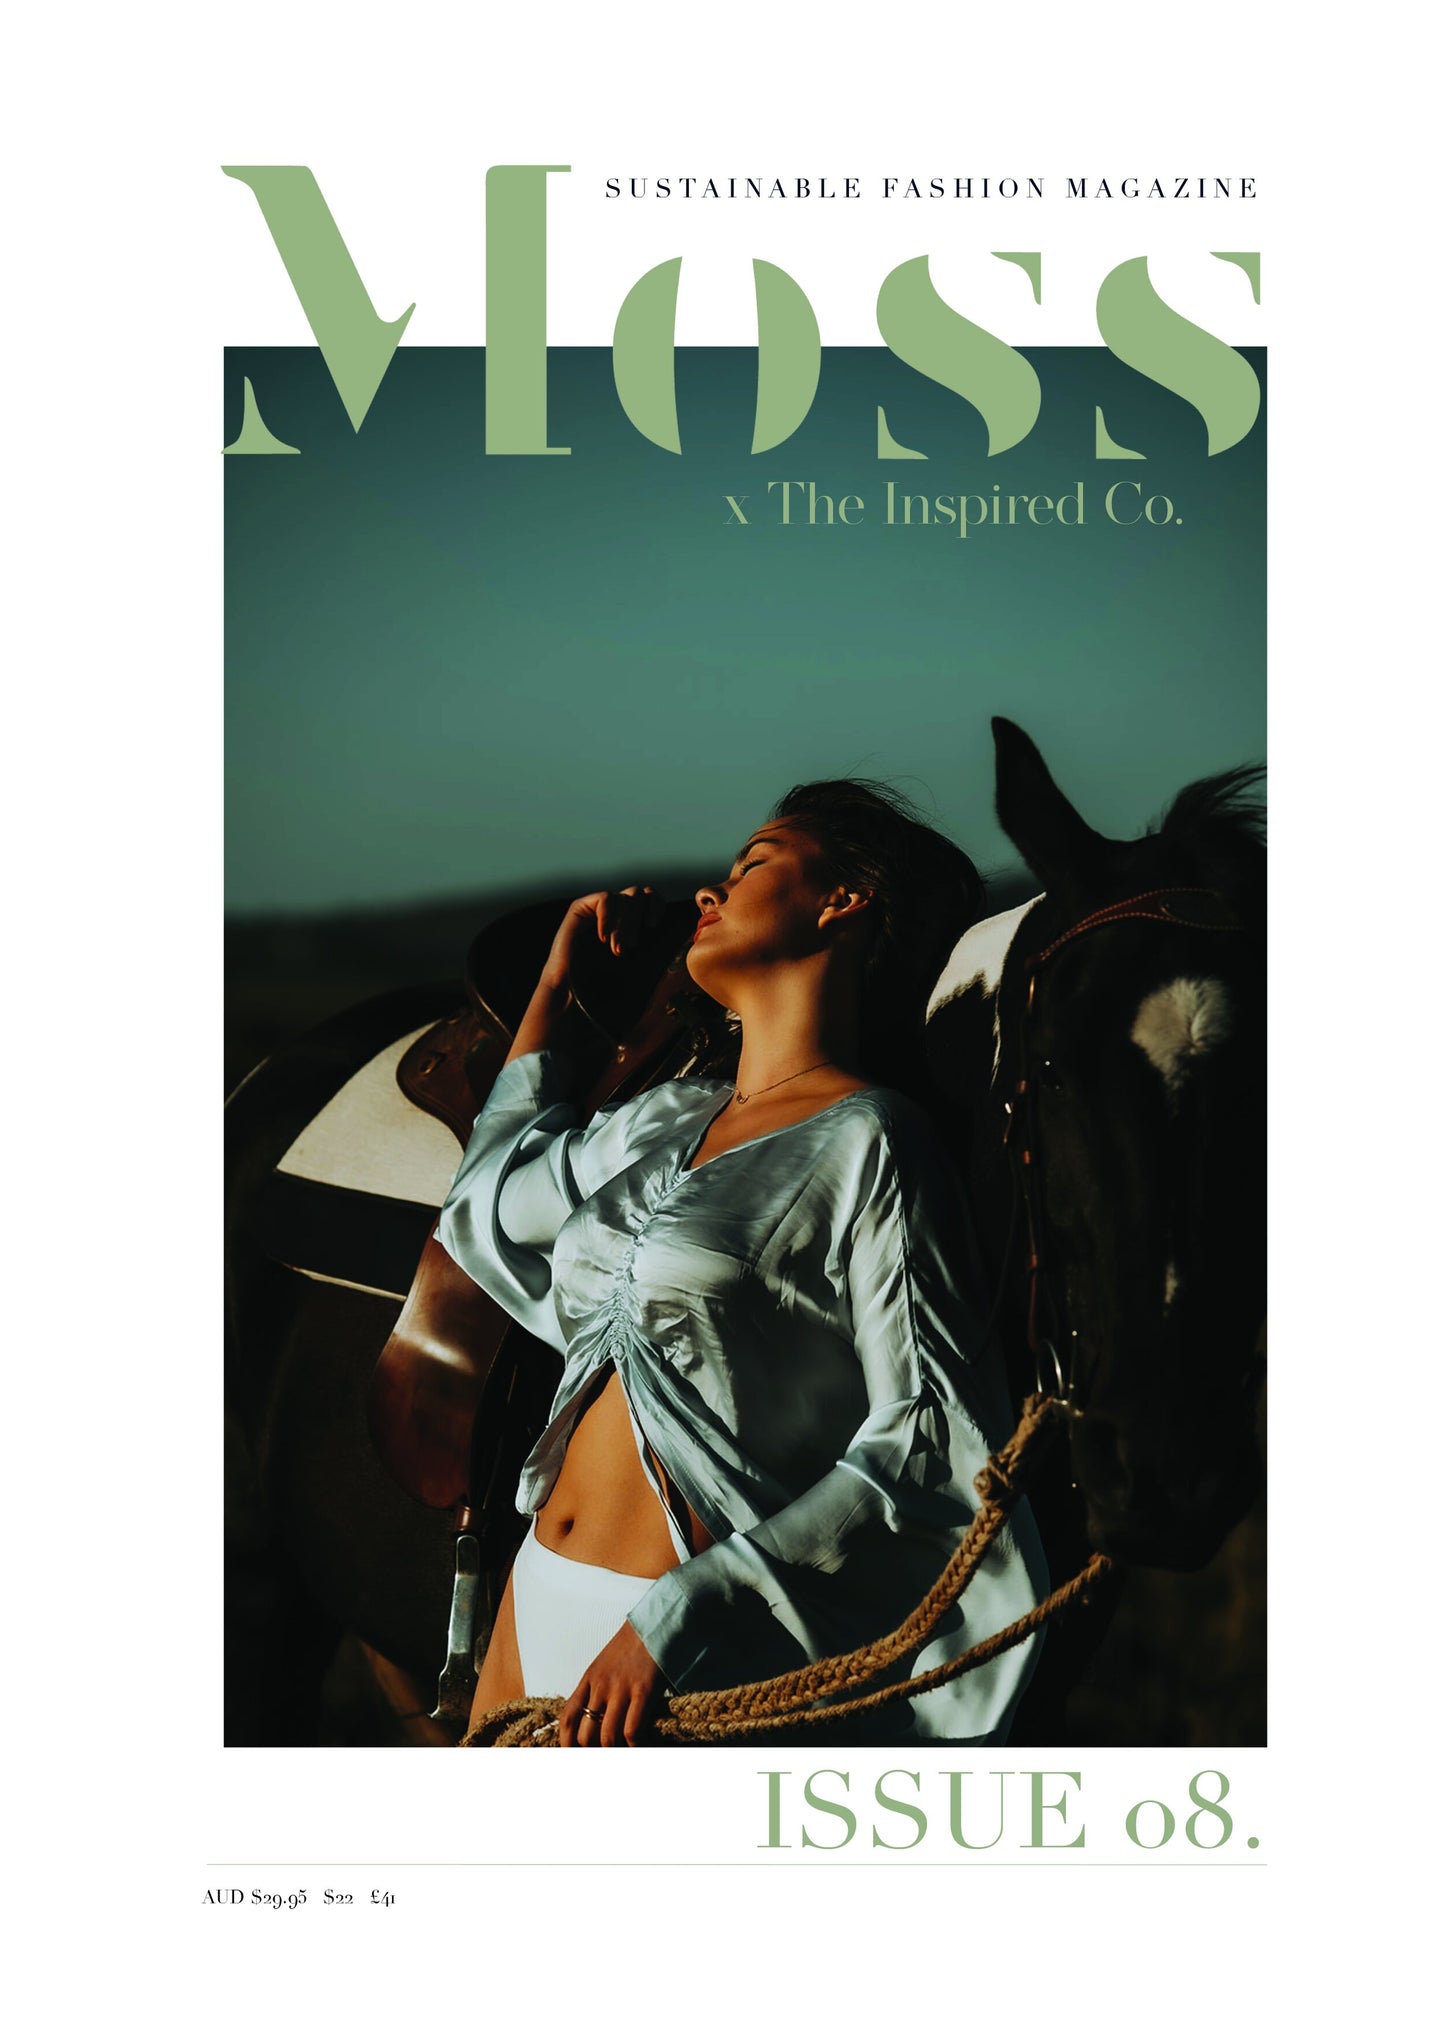 MOSS - Sustainable Fashion Magazine -ISSUE 08. MOSS x The Inspired Co.